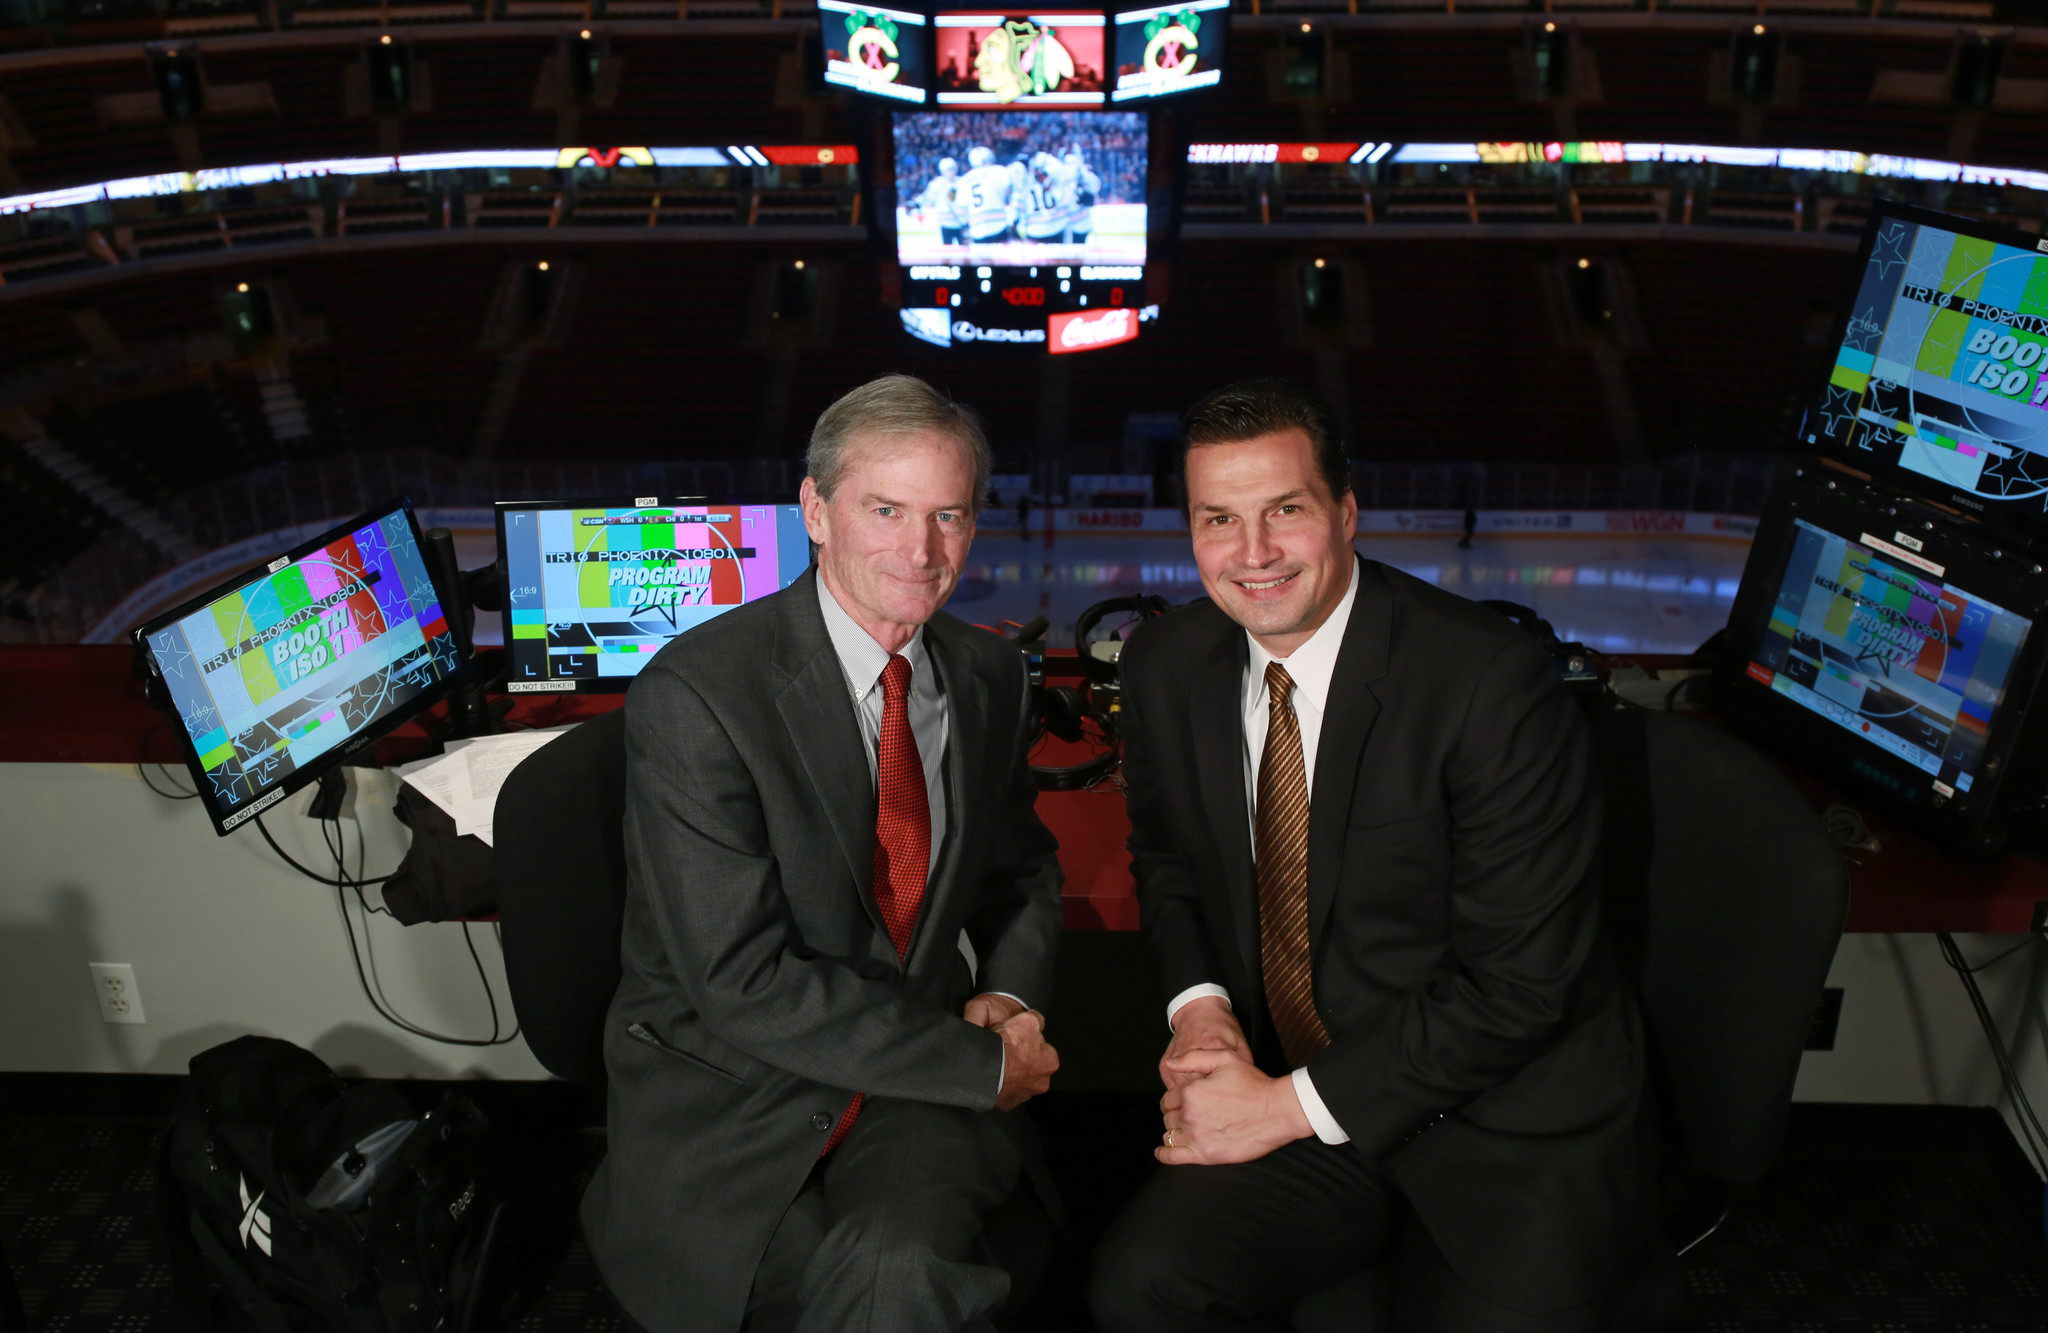 Blackhawks color analyst Olczyk: I'm going to beat this thing